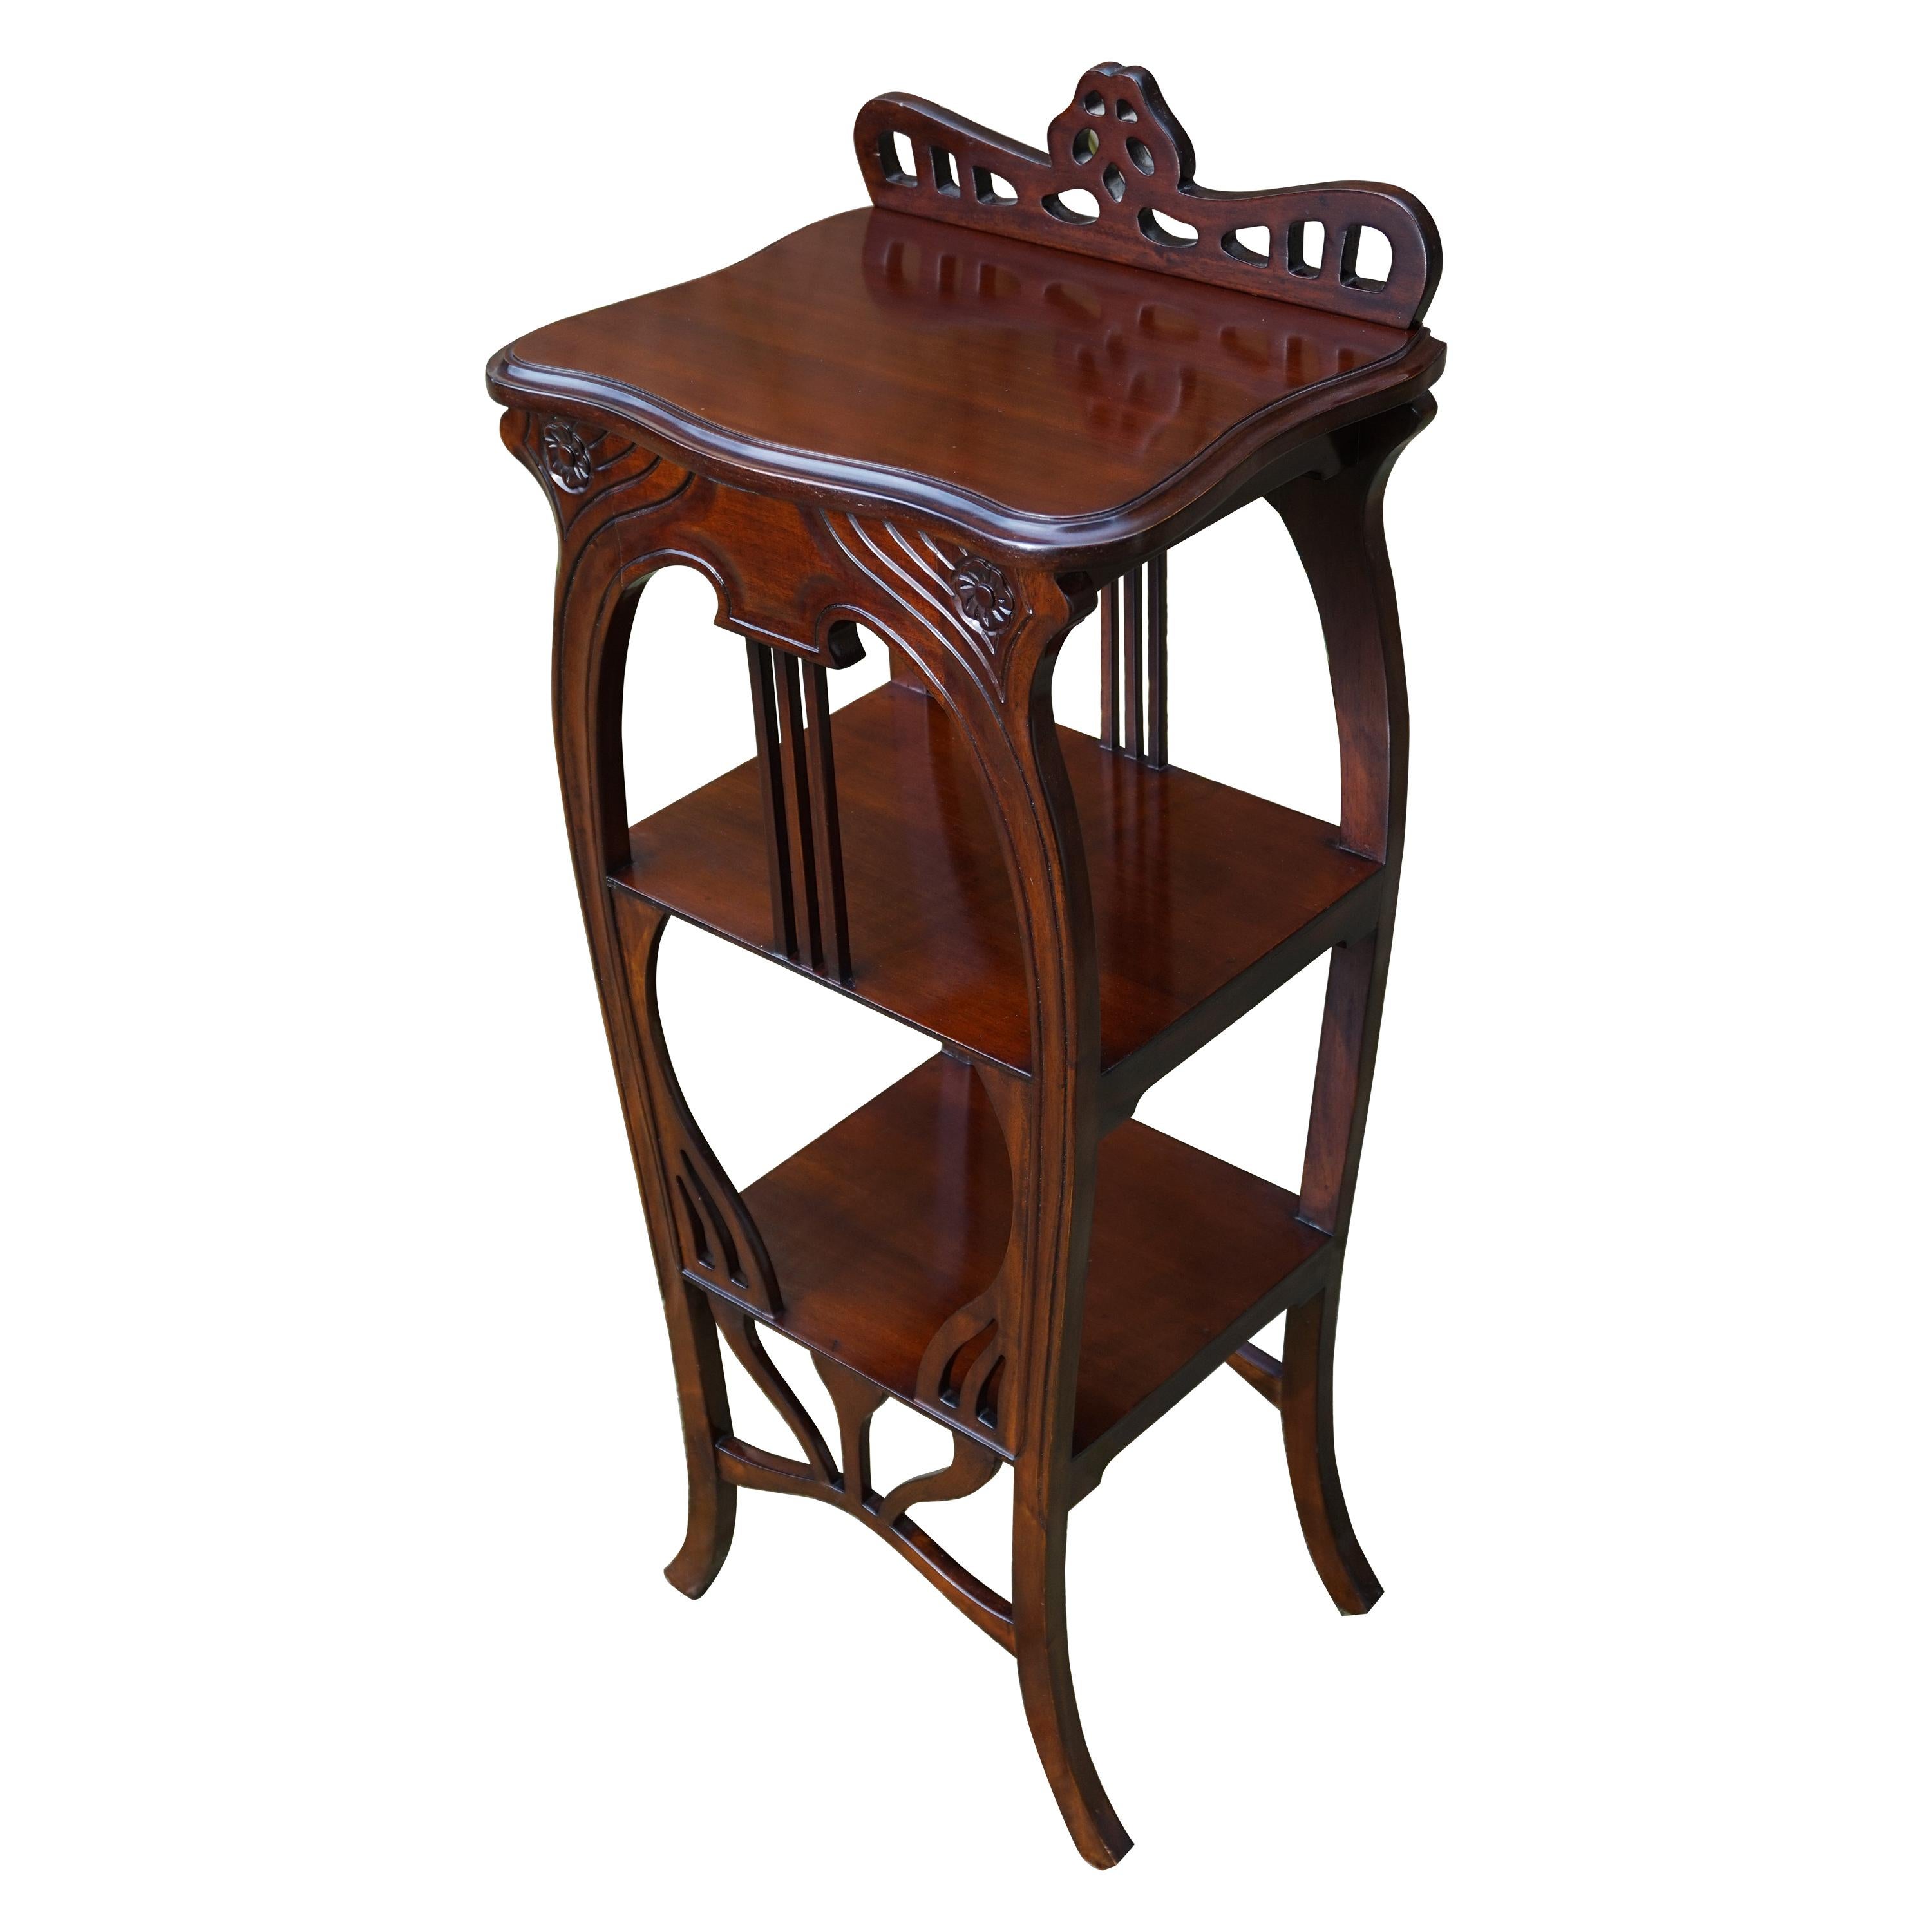 Art Nouveau Style Etagere Stand / Side Table in the Manner of Louis Majorelle